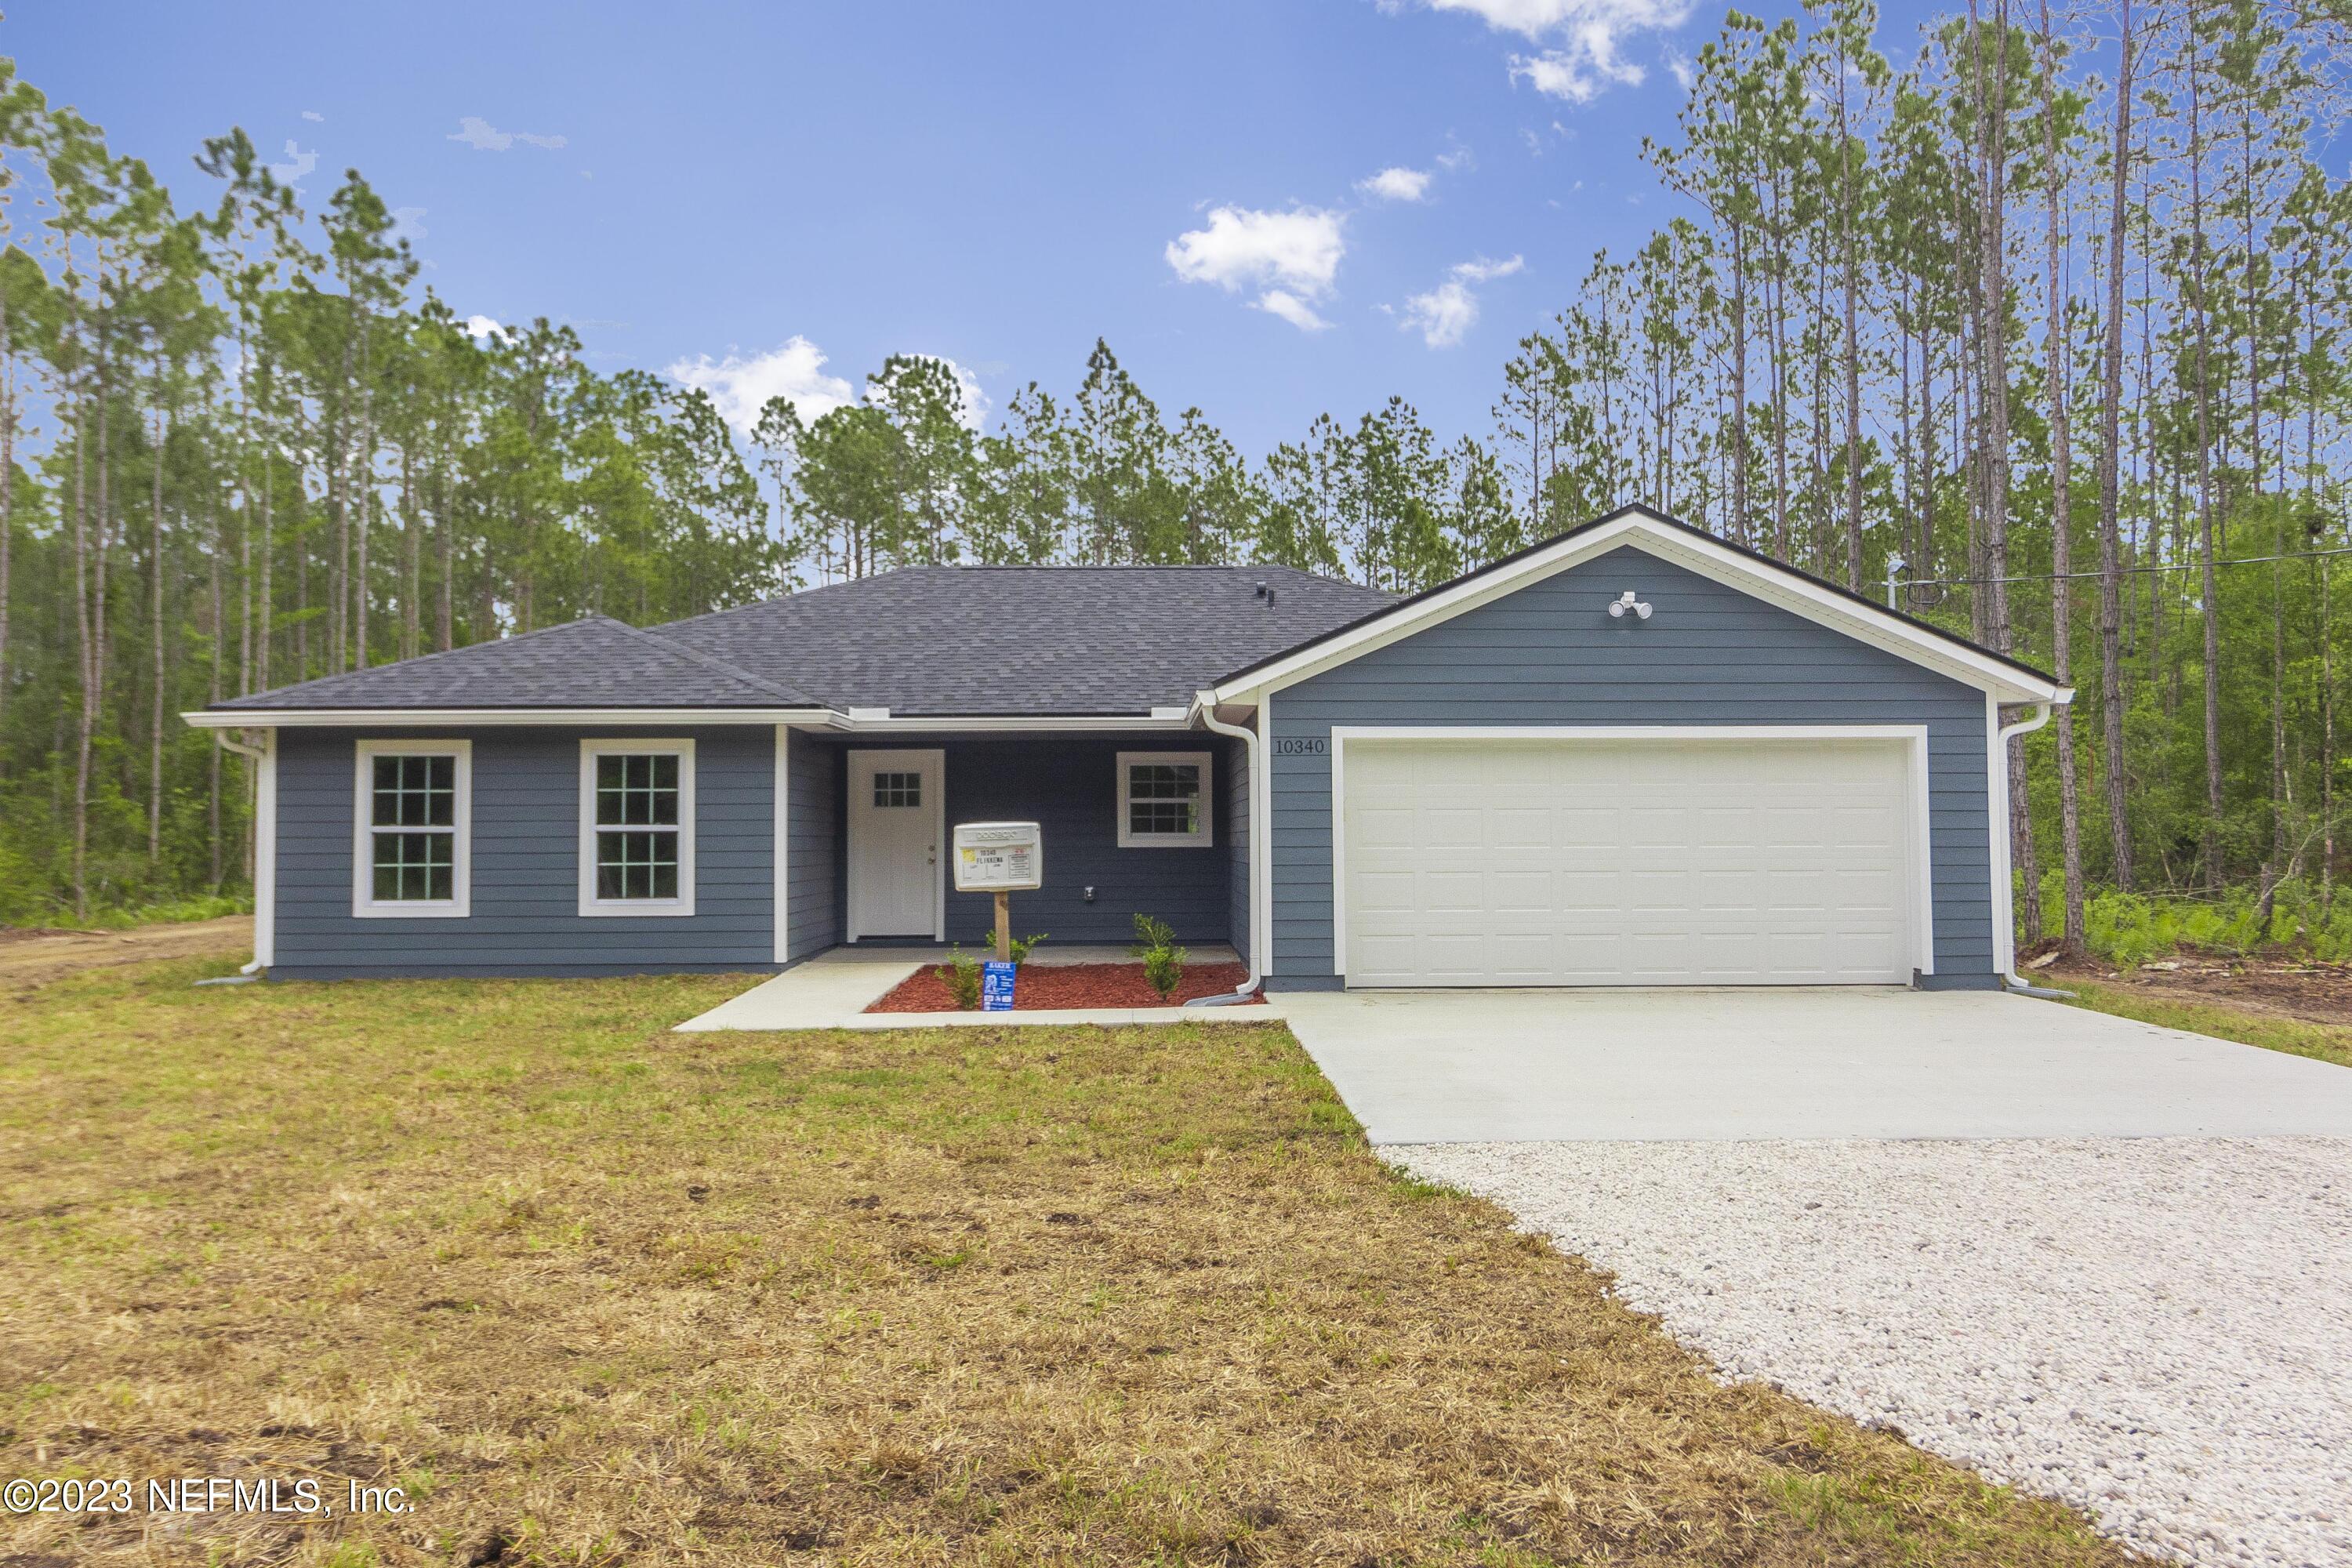 Hastings, FL home for sale located at 10340 Flikkema Avenue, Hastings, FL 32145